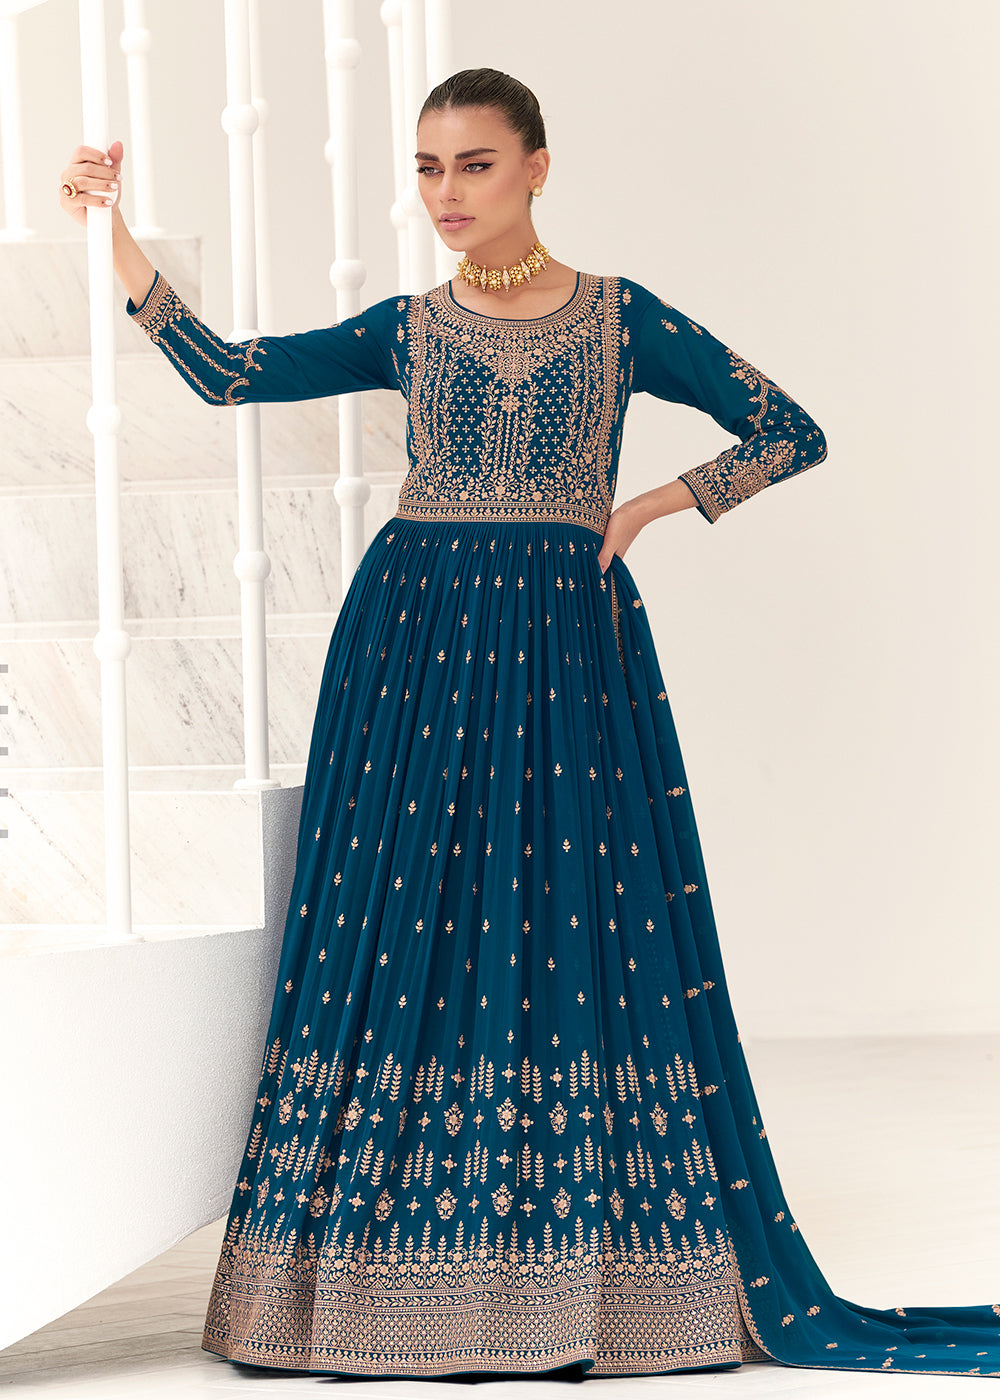 Buy Now Teal Blue Real Georgette Party Style Anarkali Suit Online in USA, UK, Australia, New Zealand, Canada & Worldwide at Empress Clothing.